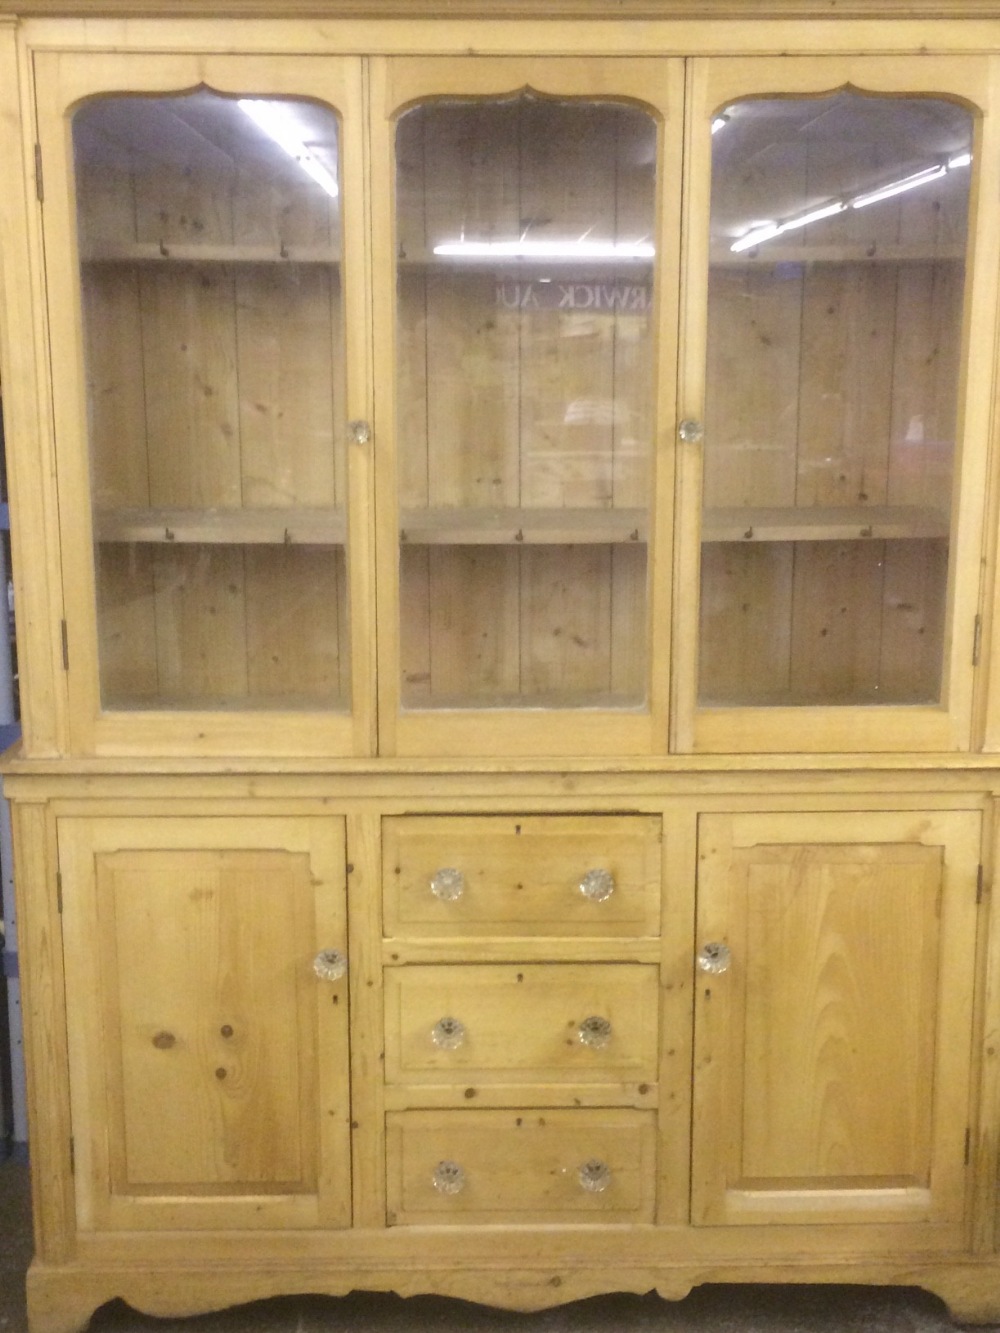 VICTORIAN PINE DRESSER WITH FIELDED PANELLED GLAZED DOORS WITH GLASS HANDLES 220CM X 165CM X 53CM